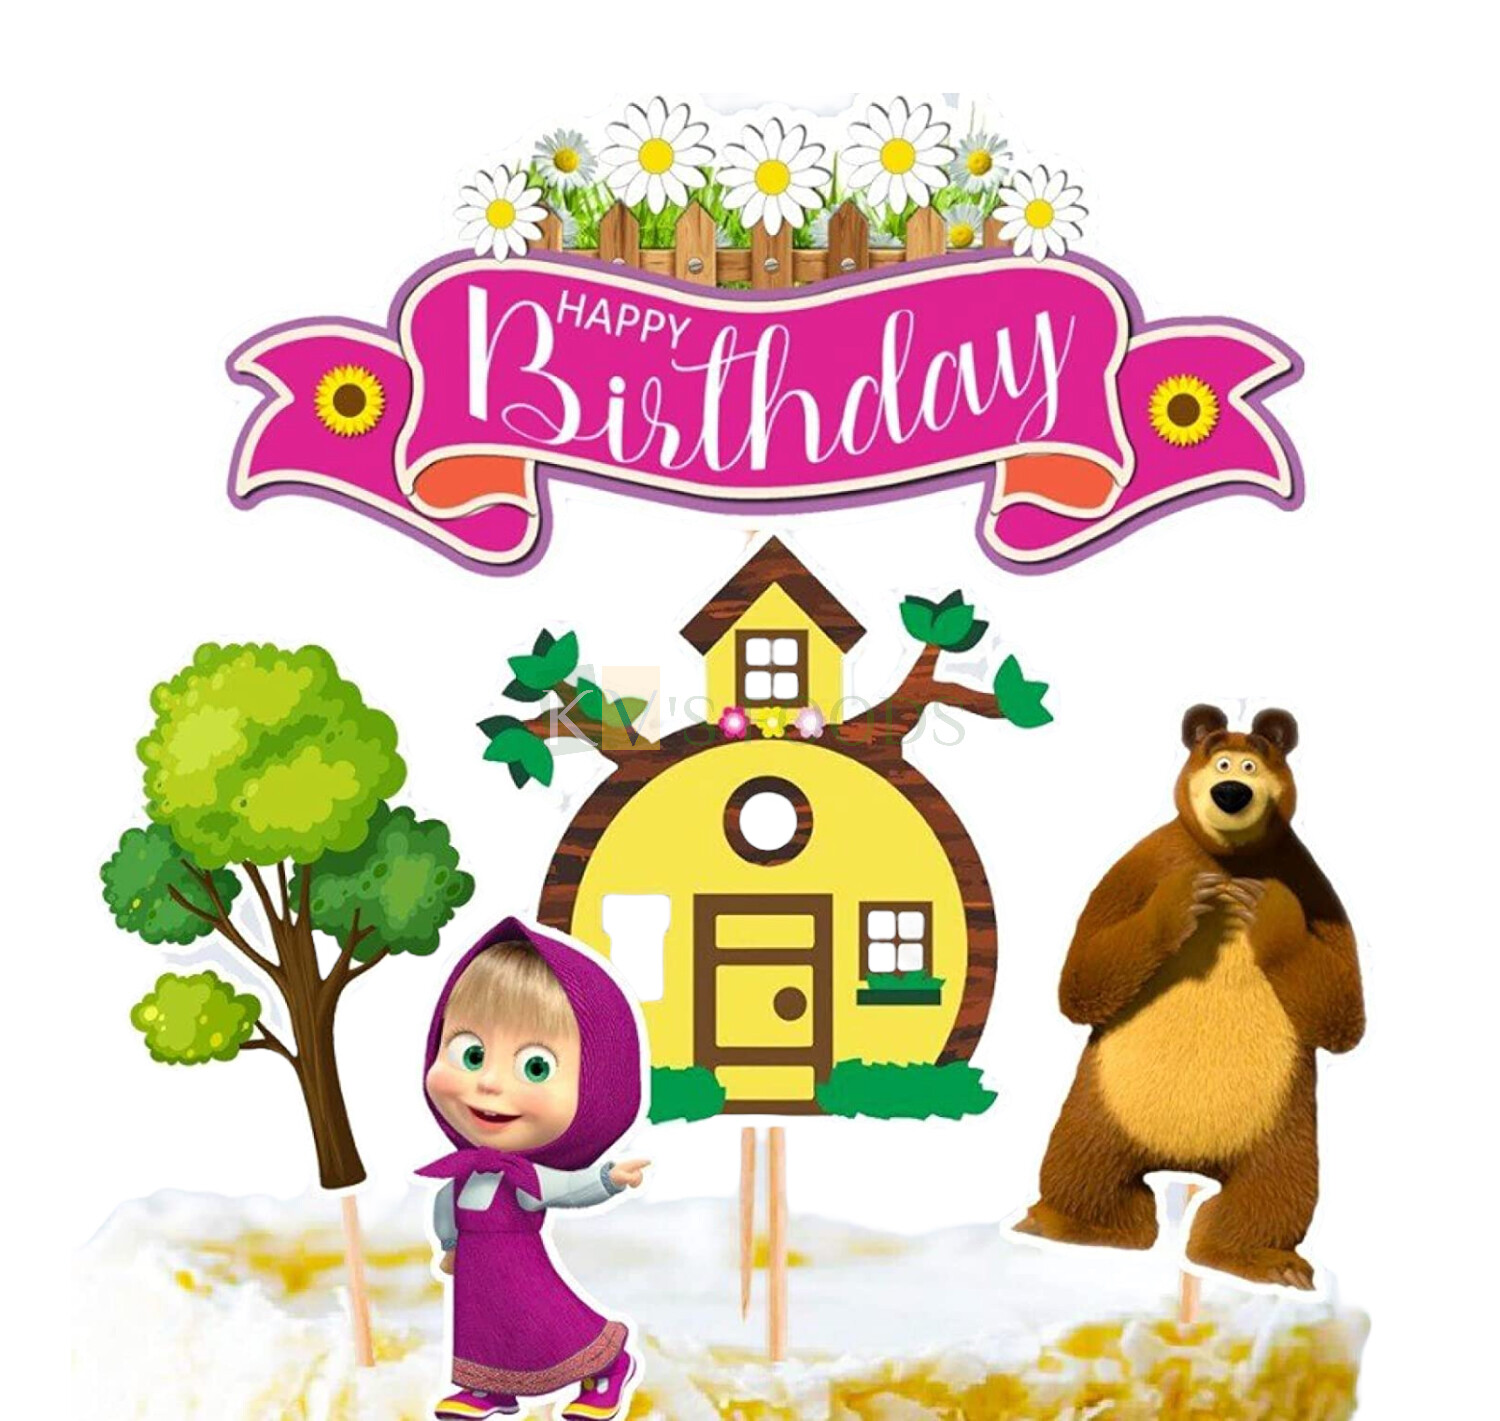 5 PC Masha and the Bear Theme Cake Topper Insert, Cake Topper, Cupcake Toppers Bday Decorations Items/Cake Accessories, Tags, Cards, Cake Toothpick Topper